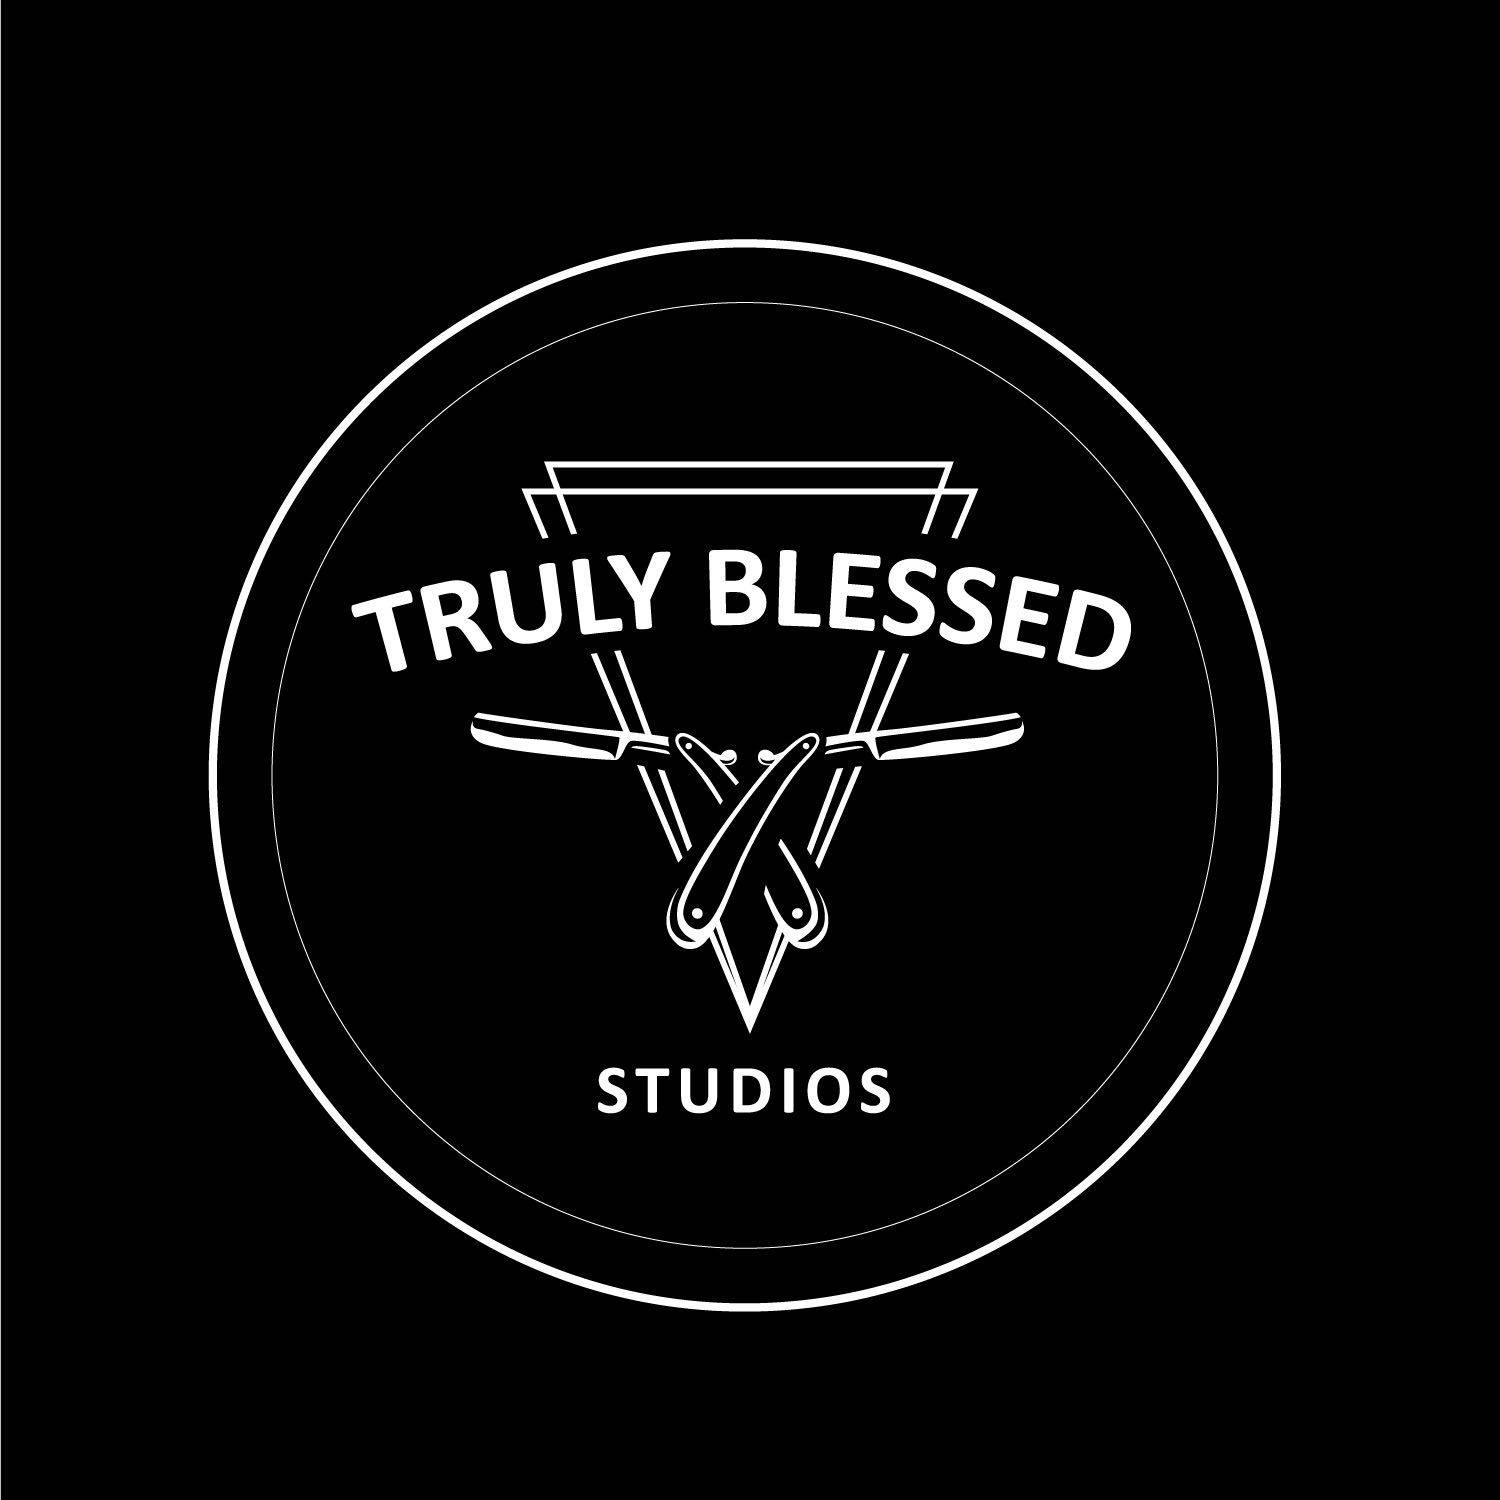 TrulyblessedStudios, 6822 Forest hill Blvd, West Palm Beach, 33413